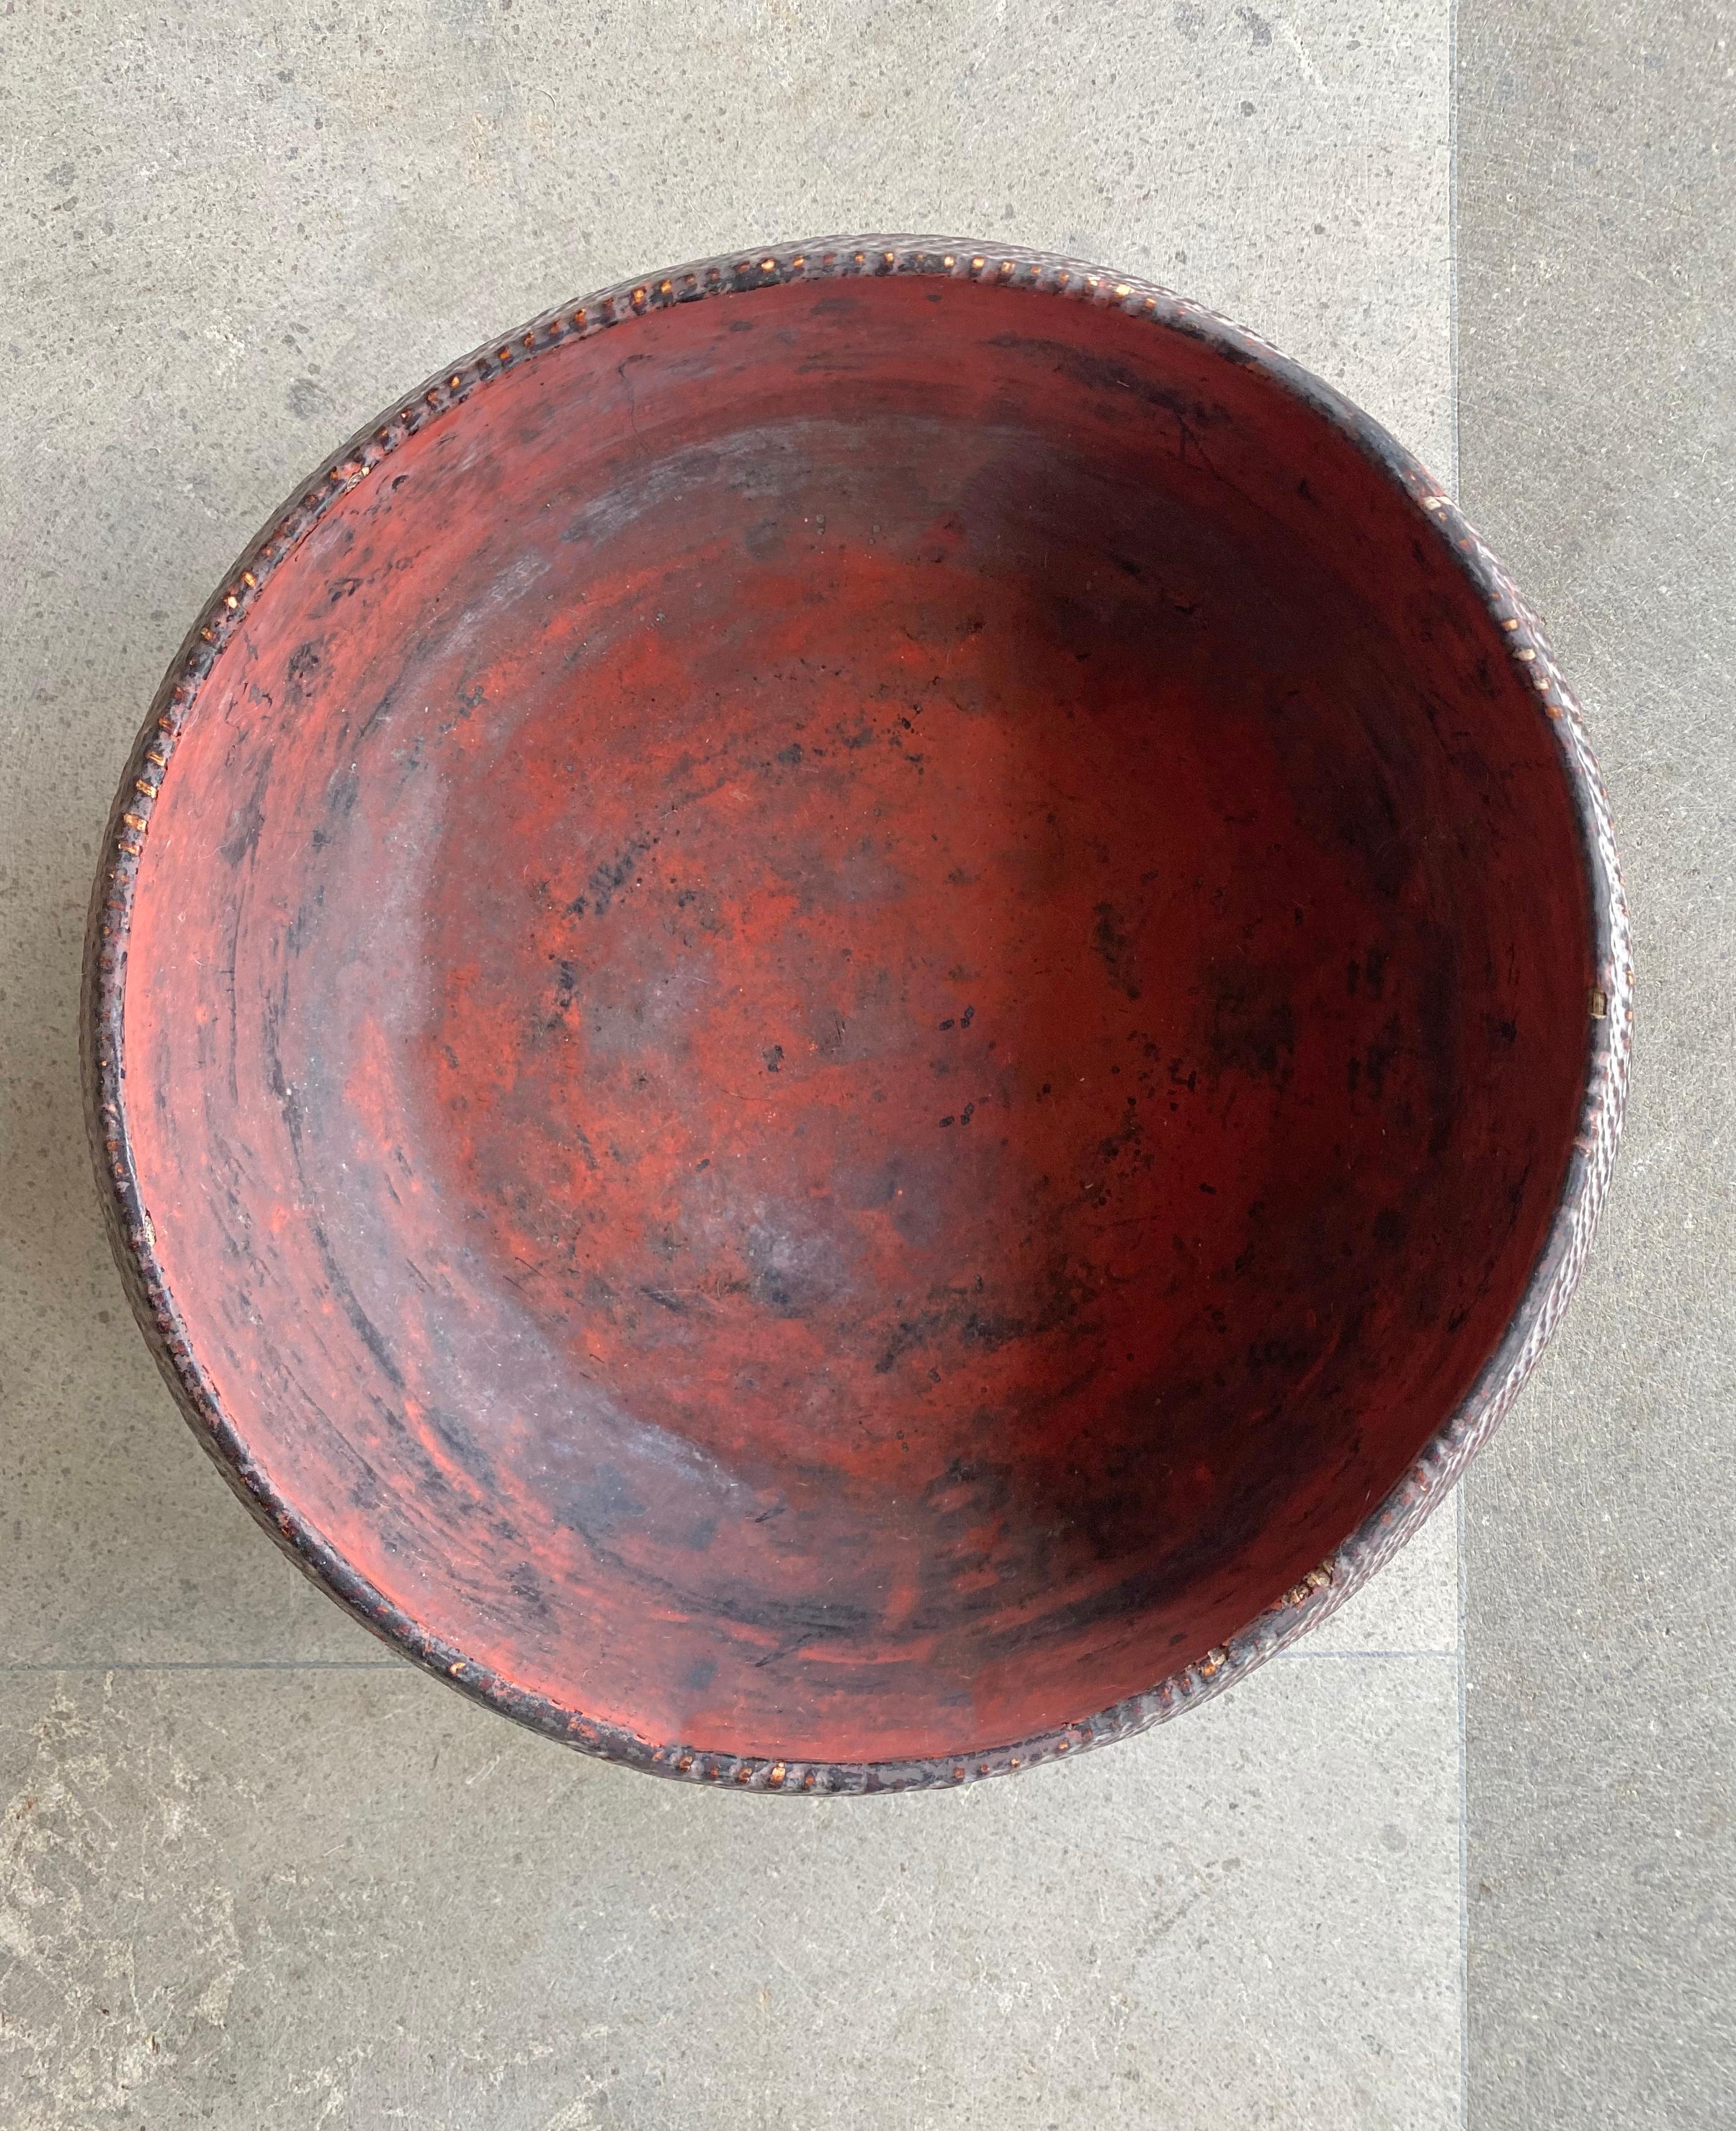 Burmese Red Lacquer Bowl with Woven Bamboo Fibres, Early 20th Century In Fair Condition For Sale In Jimbaran, Bali